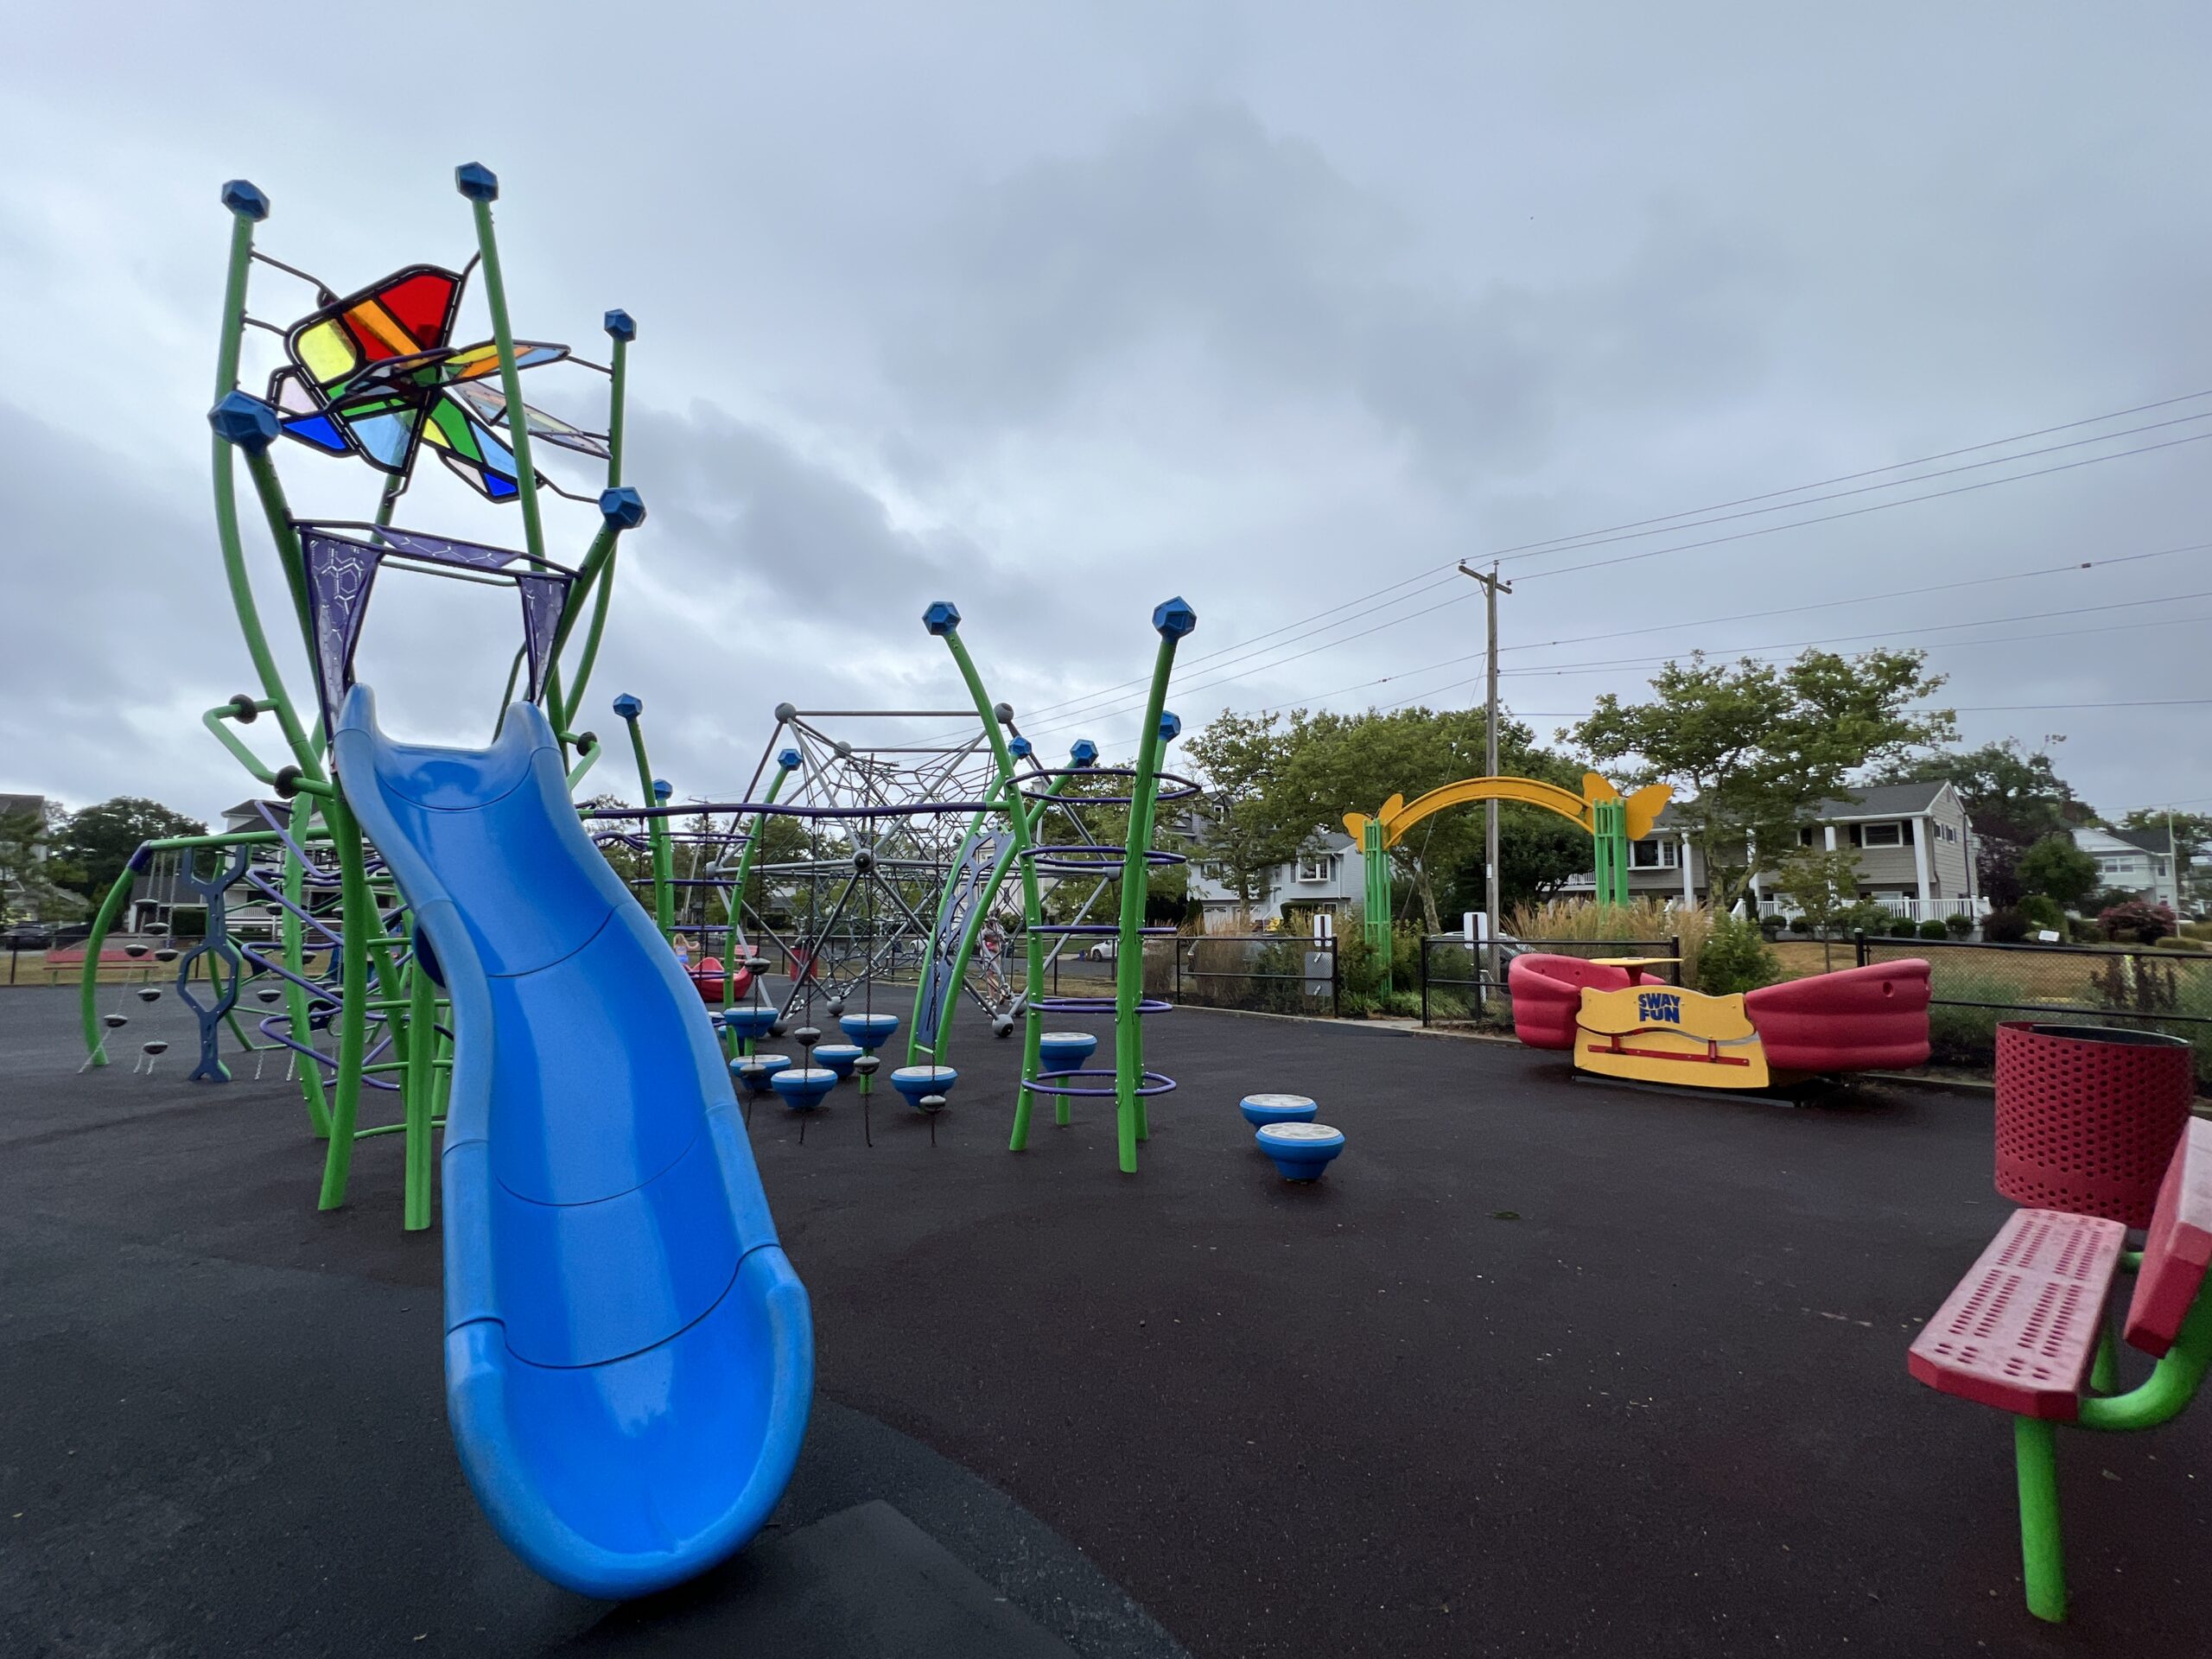 WIDE image - Blue slide, green climbing structure, and sway fun at Jane Magovern's Playground in Belmar NJ